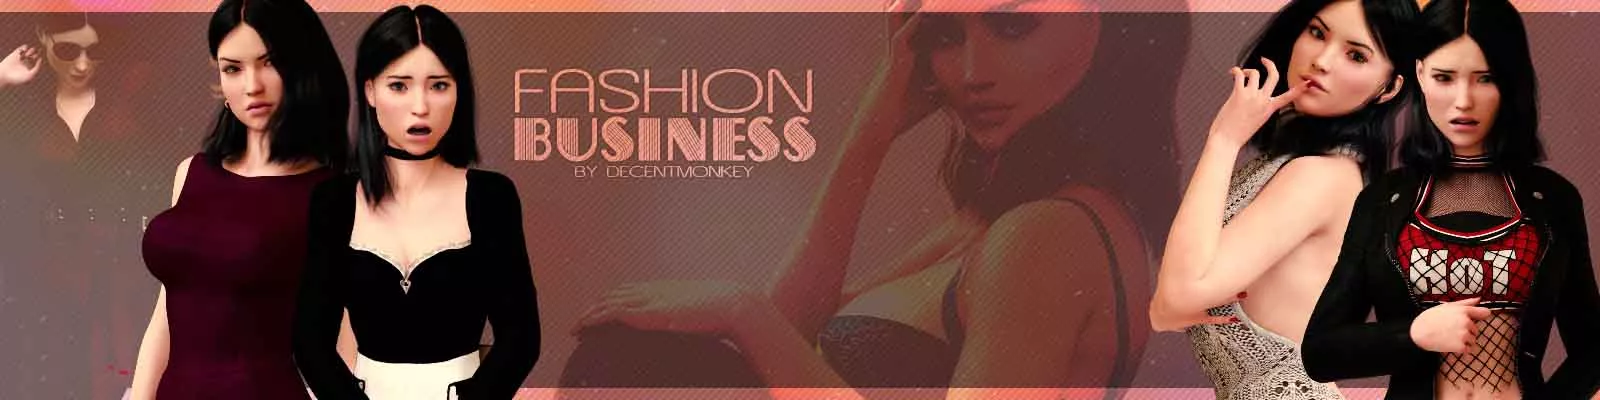 Fashion Business 3d sex game, porn game, adult game